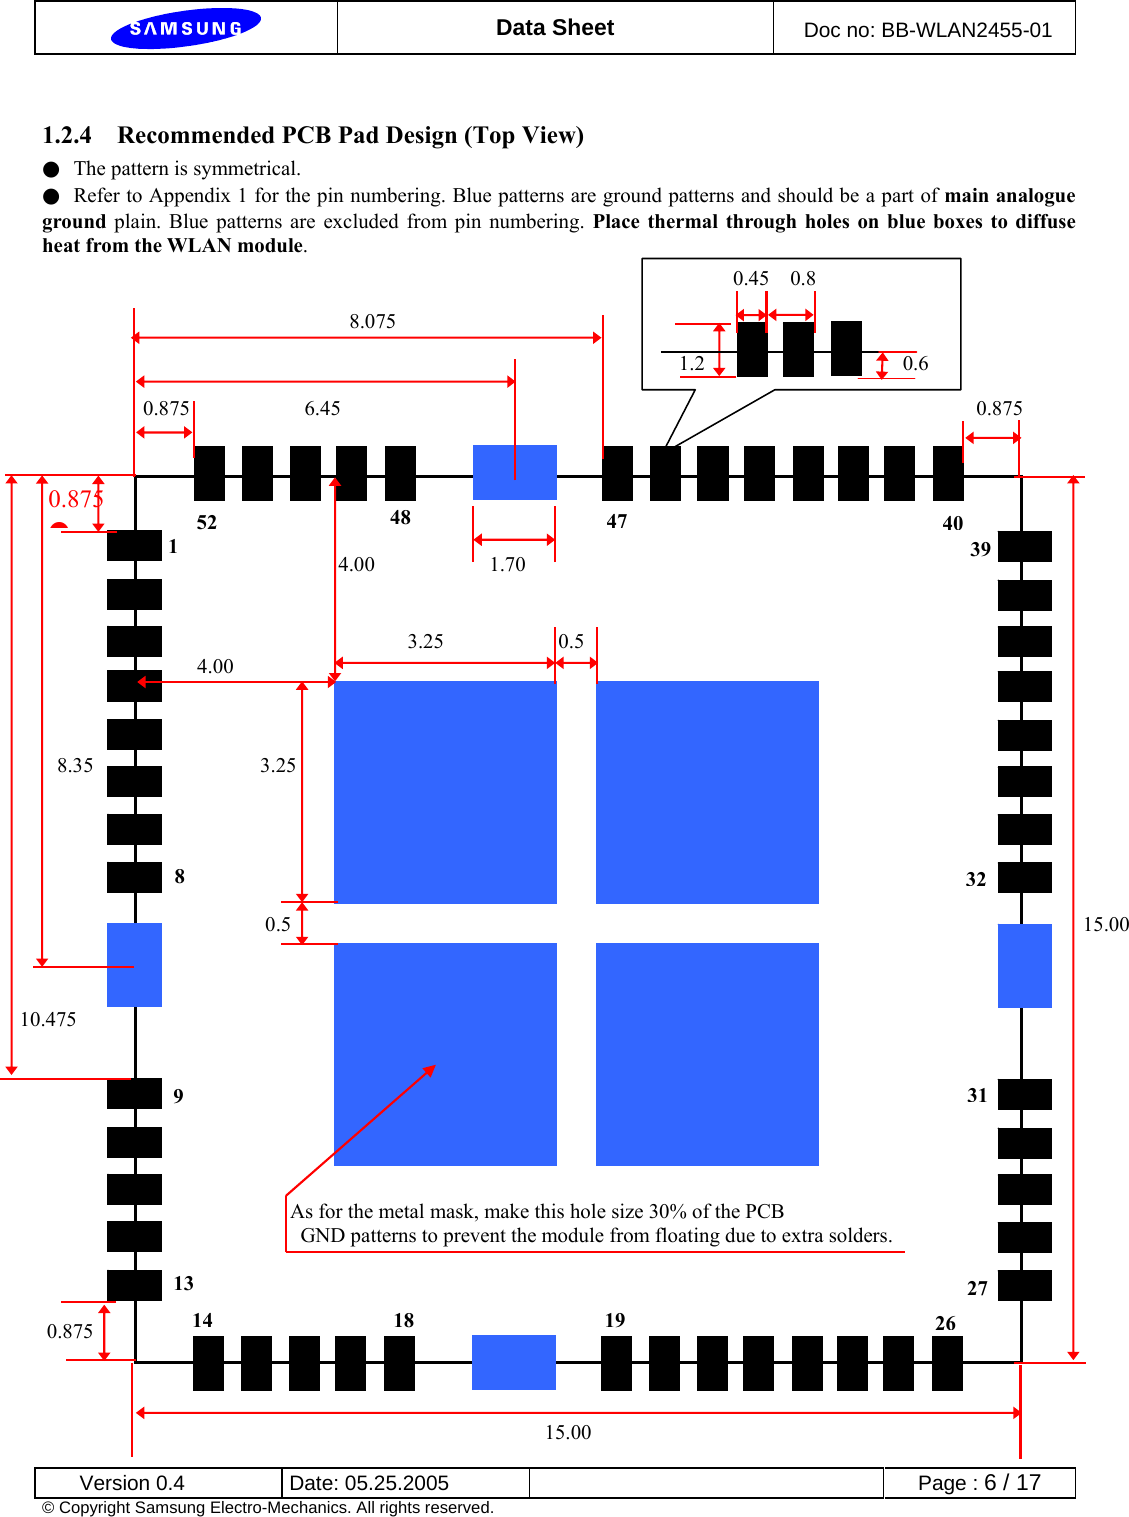  Data Sheet  Doc no: BB-WLAN2455-01  Version 0.4  Date: 05.25.2005      Page : 6 / 17 © Copyright Samsung Electro-Mechanics. All rights reserved.  1.2.4 Recommended PCB Pad Design (Top View) ●  The pattern is symmetrical. ●  Refer to Appendix 1 for the pin numbering. Blue patterns are ground patterns and should be a part of main analogue ground plain. Blue patterns are excluded from pin numbering. Place thermal through holes on blue boxes to diffuse   heat from the WLAN module.0.875     ●8.35                3.250.875           6.45                                                             0.8758.075 10.475        As for the metal mask, make this hole size 30% of the PCB   GND patterns to prevent the module from floating due to extra solders. 0.875 15.003.25           0.5 4.00 0.45  0.8   1.2                   0.6 4.00           1.70      0.5                                                                            15.001 8 9 13 141819262731323940475248